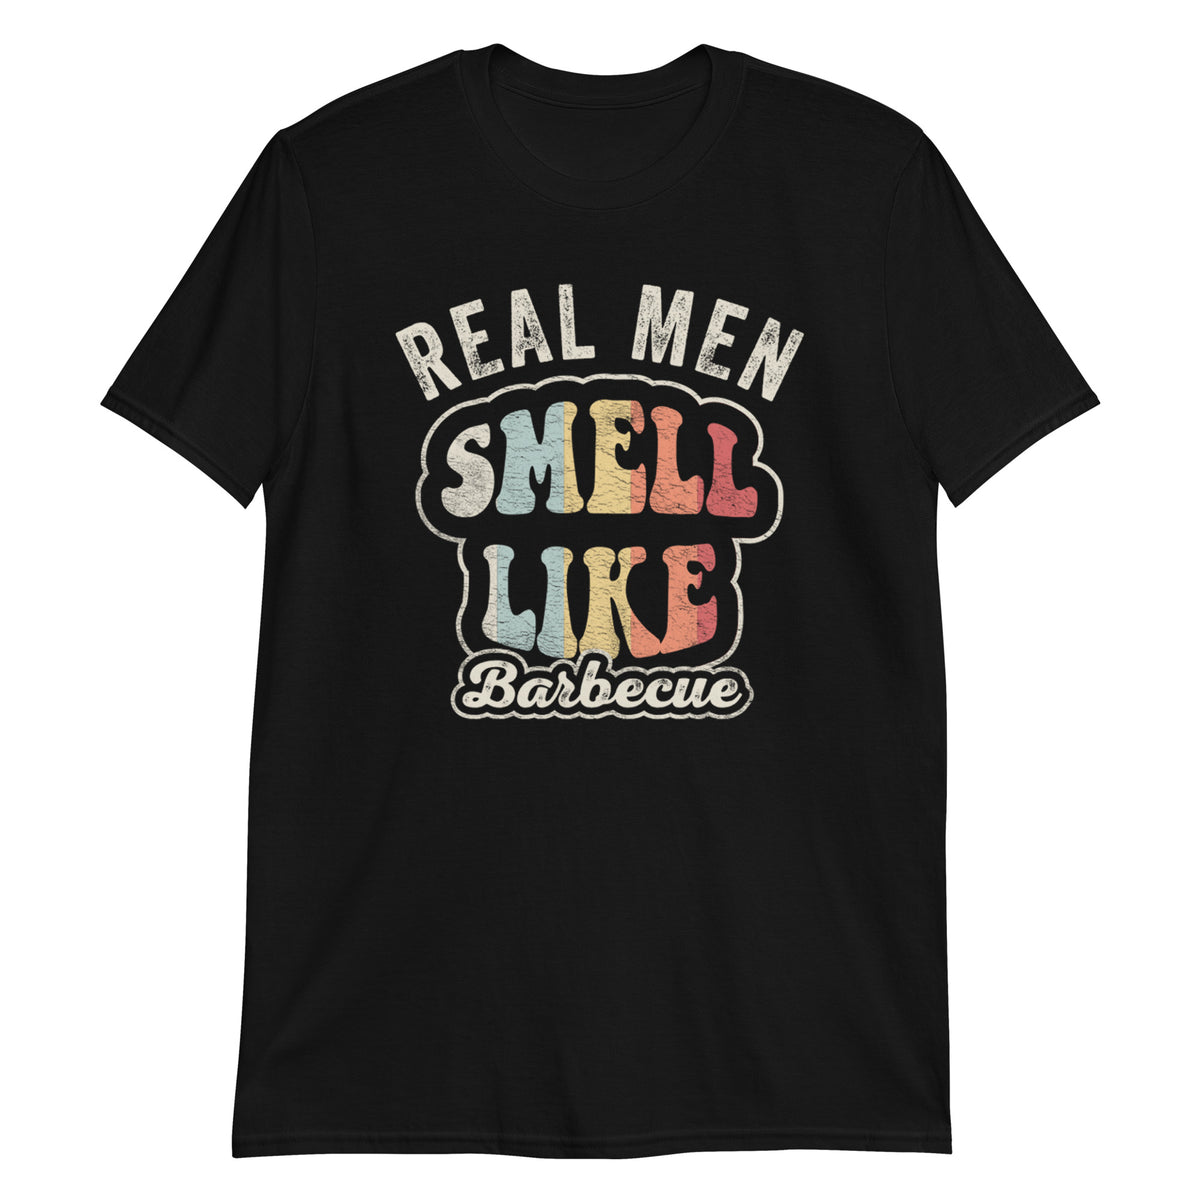 Real Men Smell Like Barbecue T-Shirt